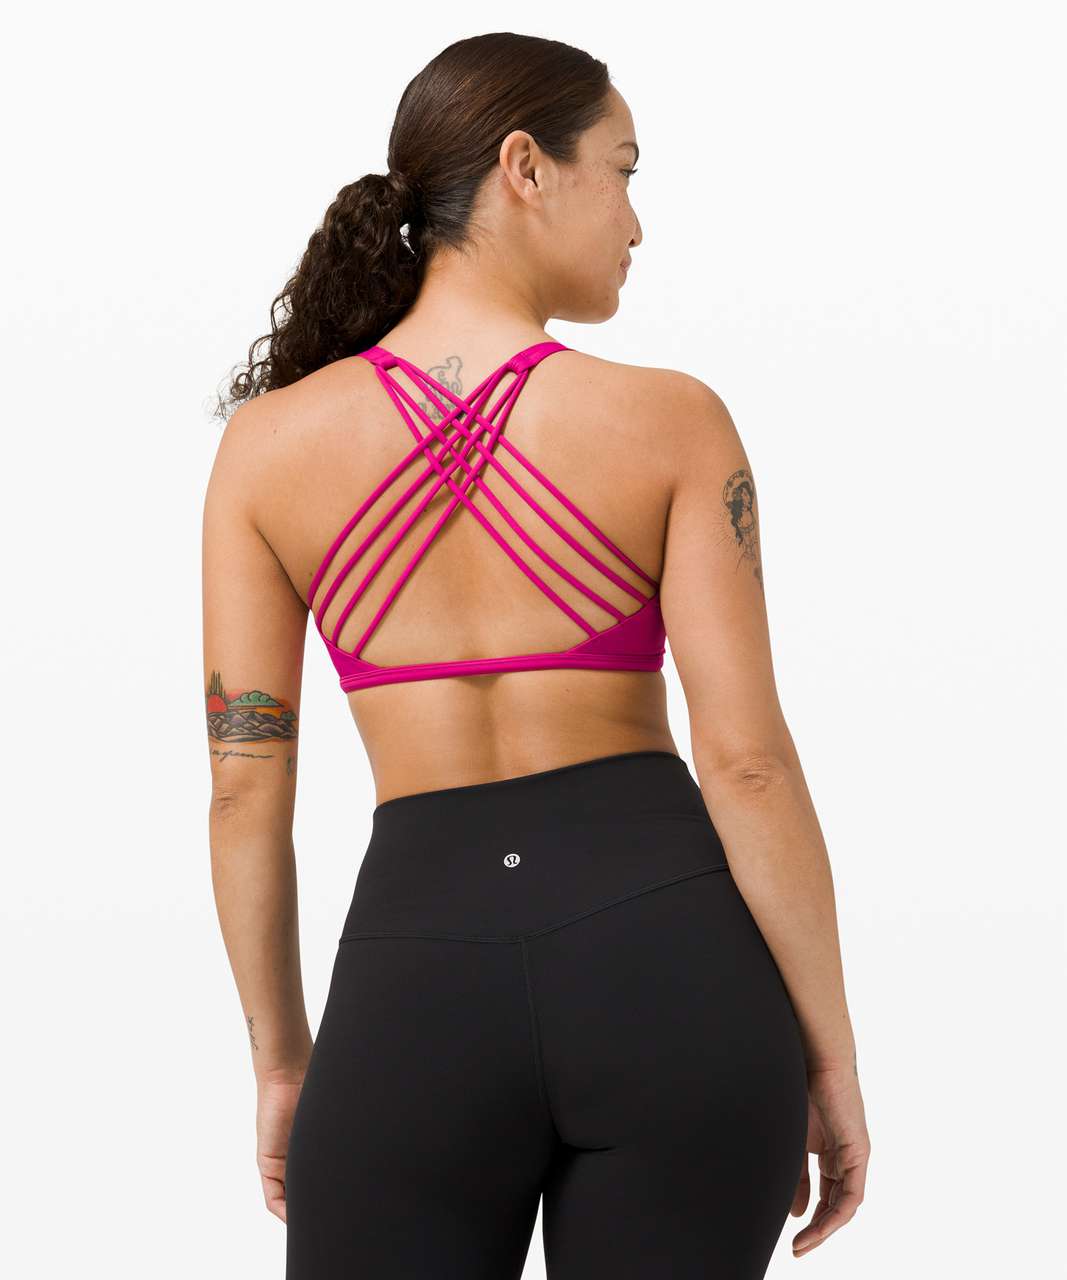 Lululemon Free to Be Bra - Wild *Light Support, A/B Cup - Ripened Raspberry